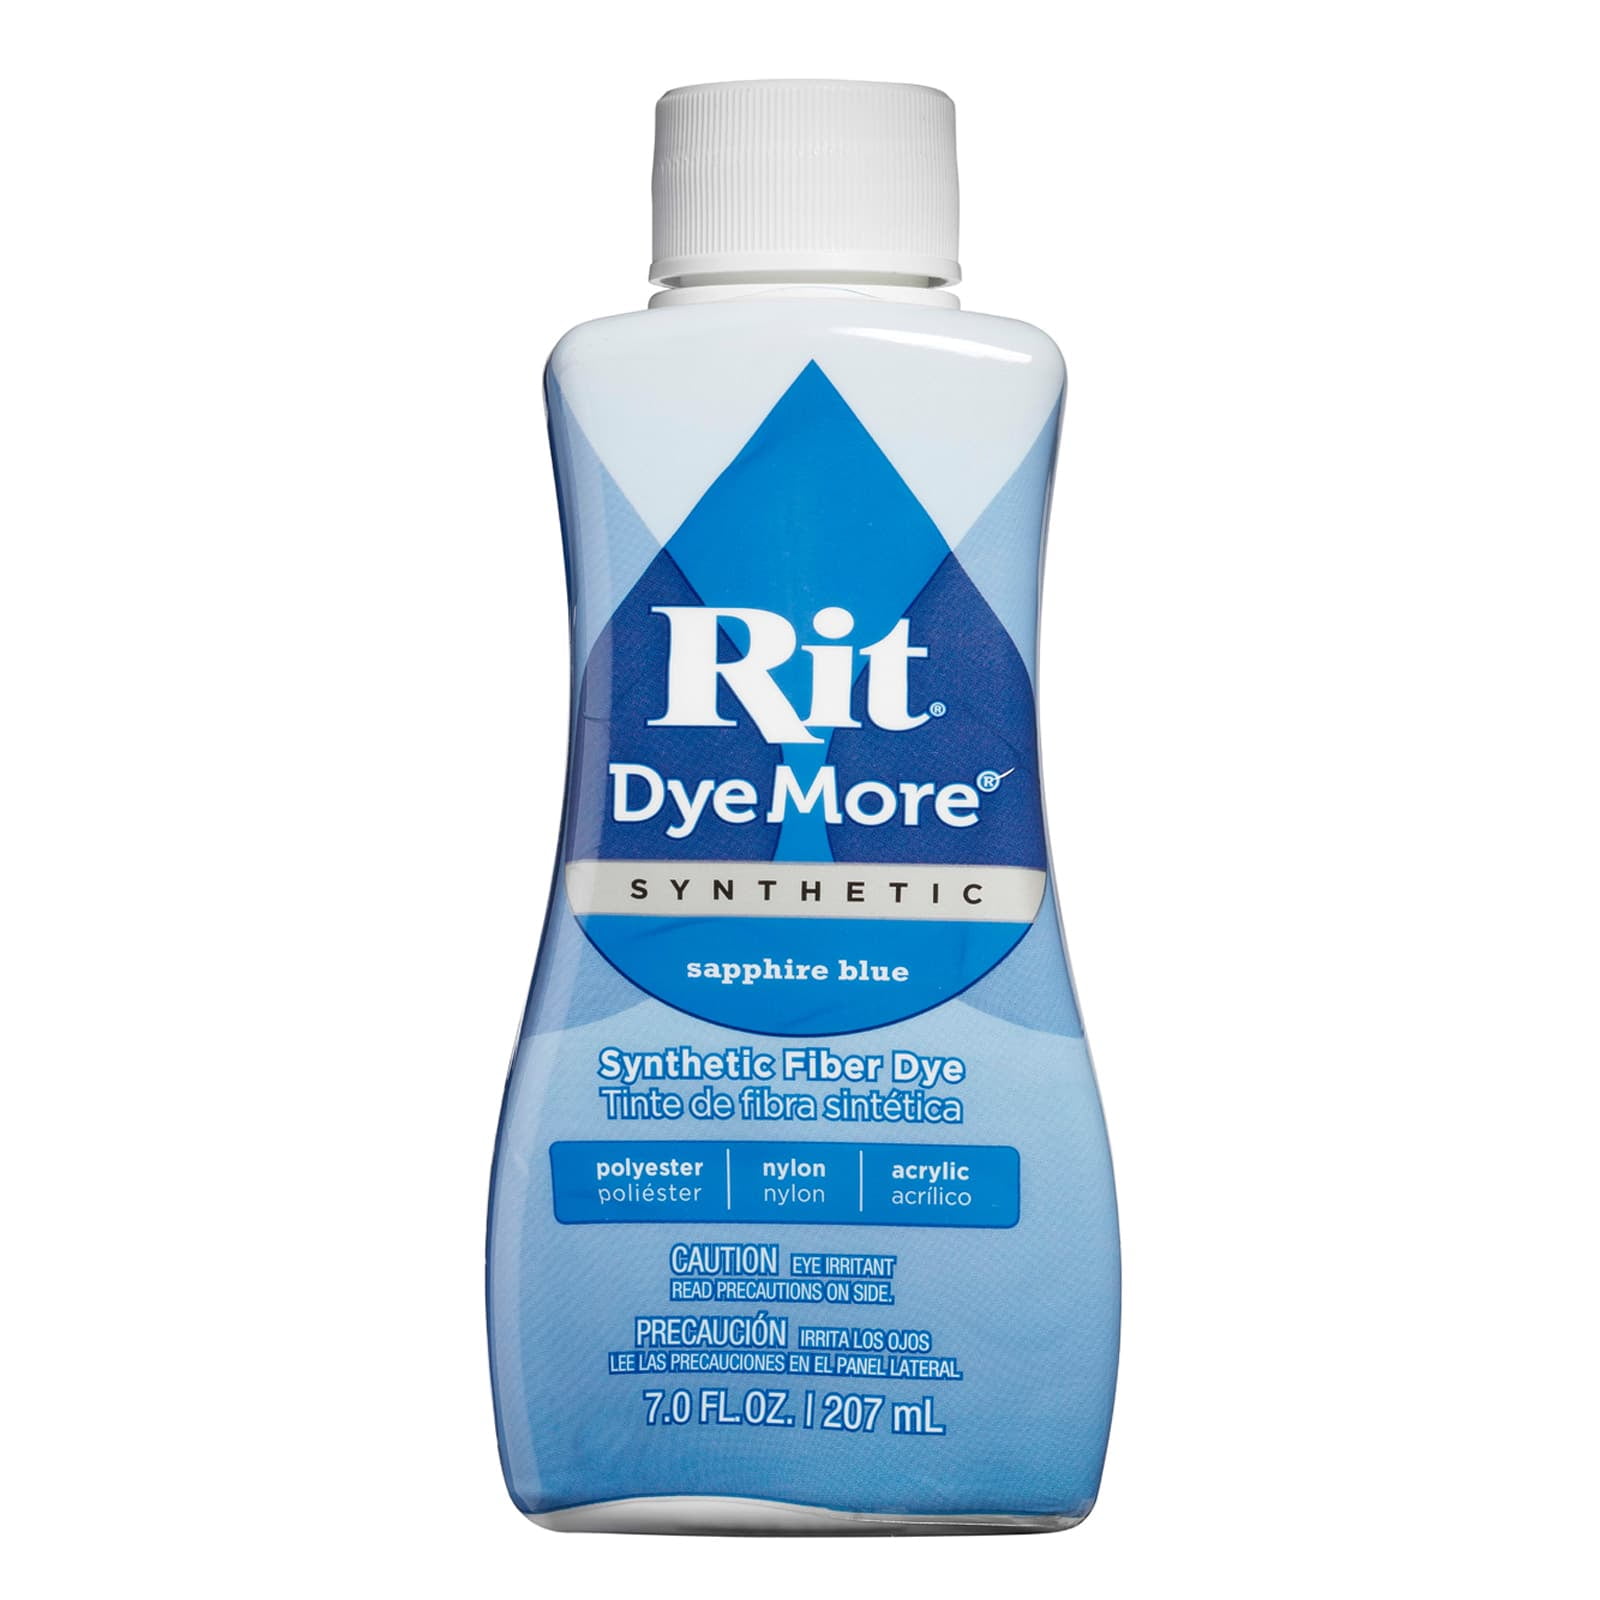 Rit Dye – Fabric Dye For Clothing, Home Décor, Crafts and More